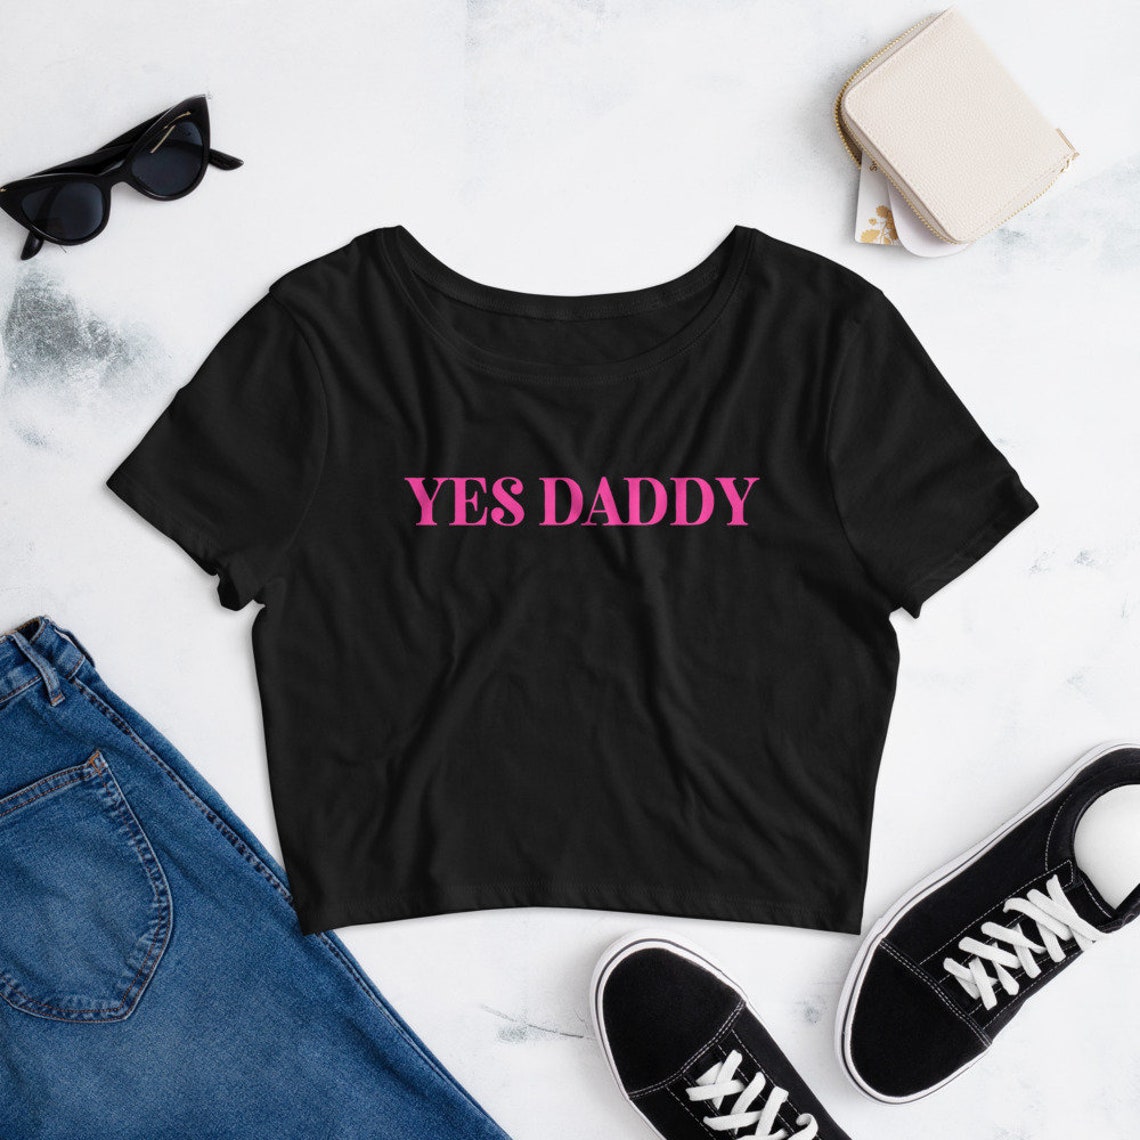 Yes Daddy Crop Top Ddlg Clothes Submissive Clothing Bdsm Etsy